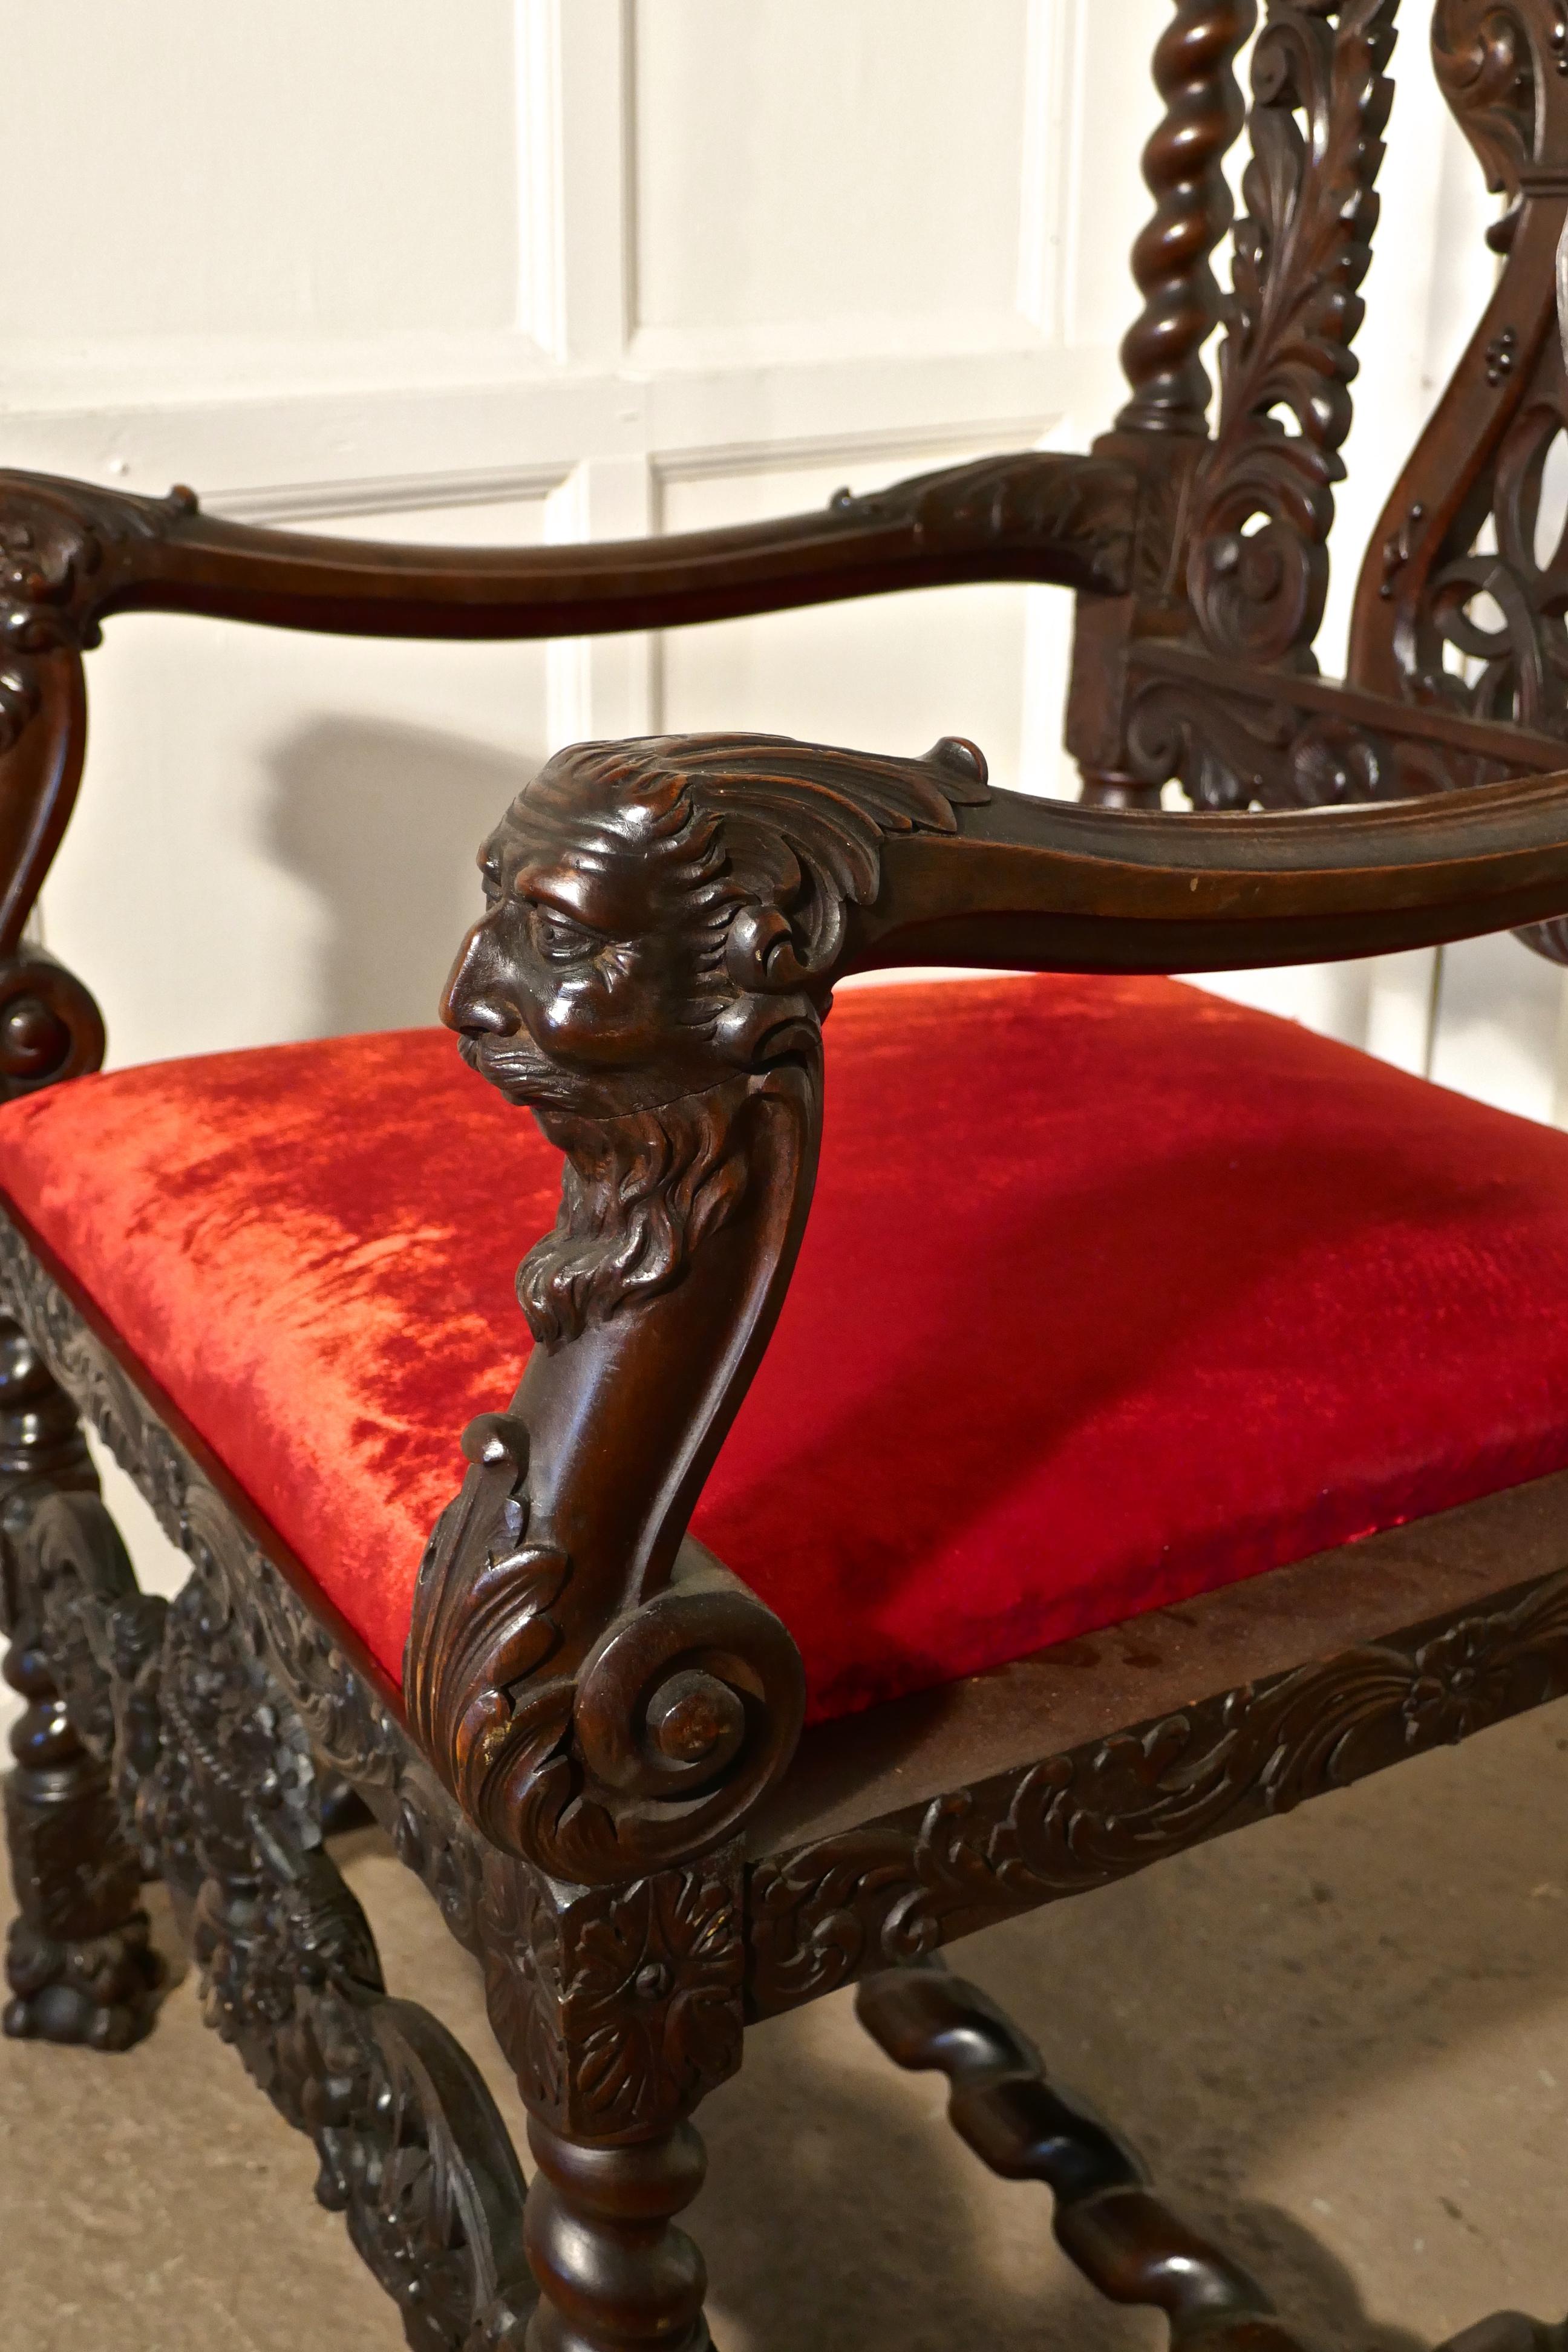 French 19th century carved walnut throne or hall chair.

This very tall chair is a superb and intricately carved piece, unusually the chair is carved on both back and front so intended to be viewed from all sides, the carved detail is